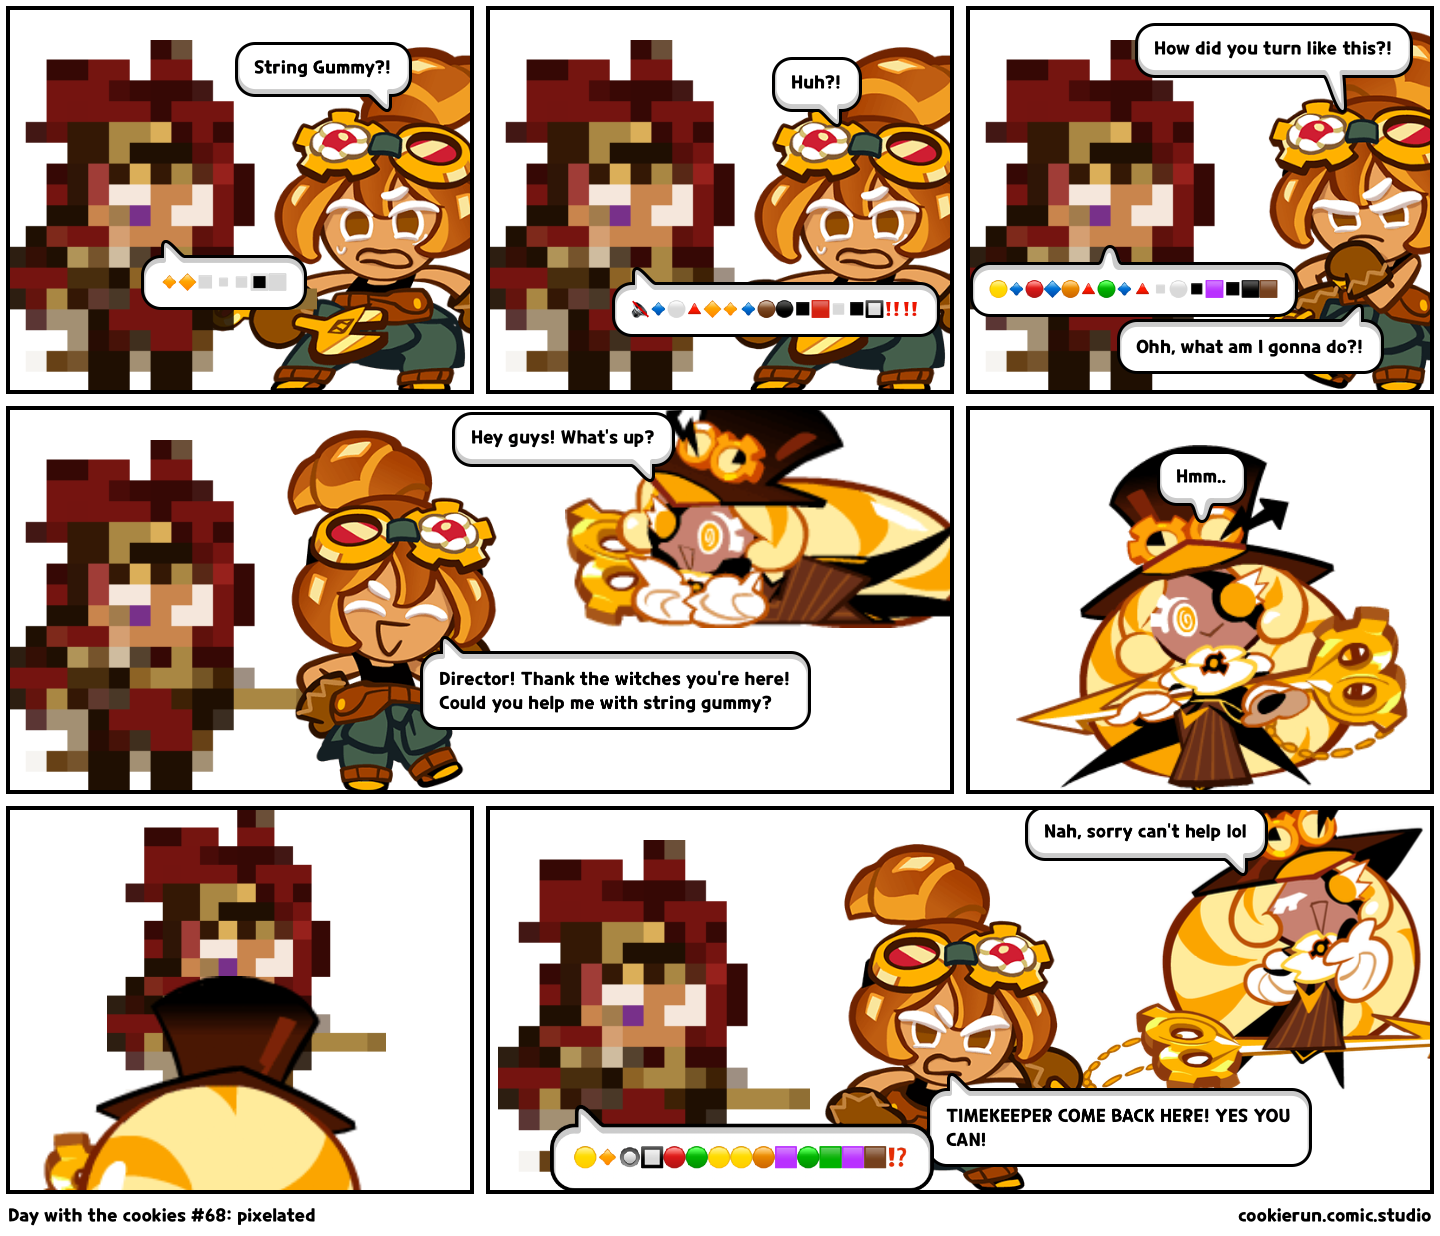 Day with the cookies #68: pixelated